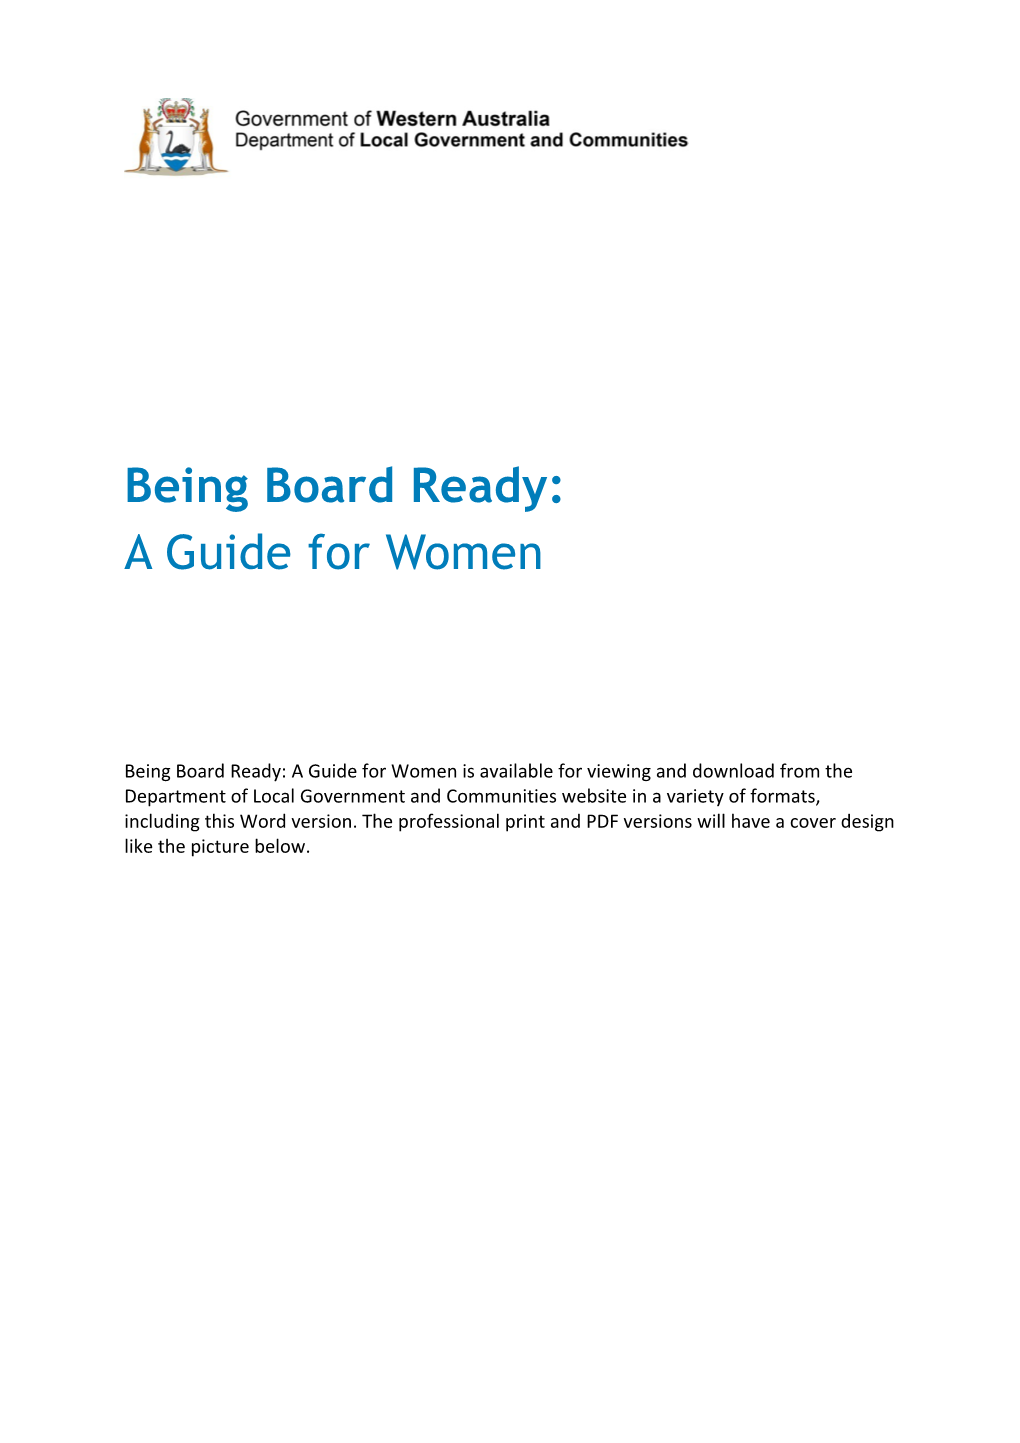 Being Board Ready: a Guide for Women